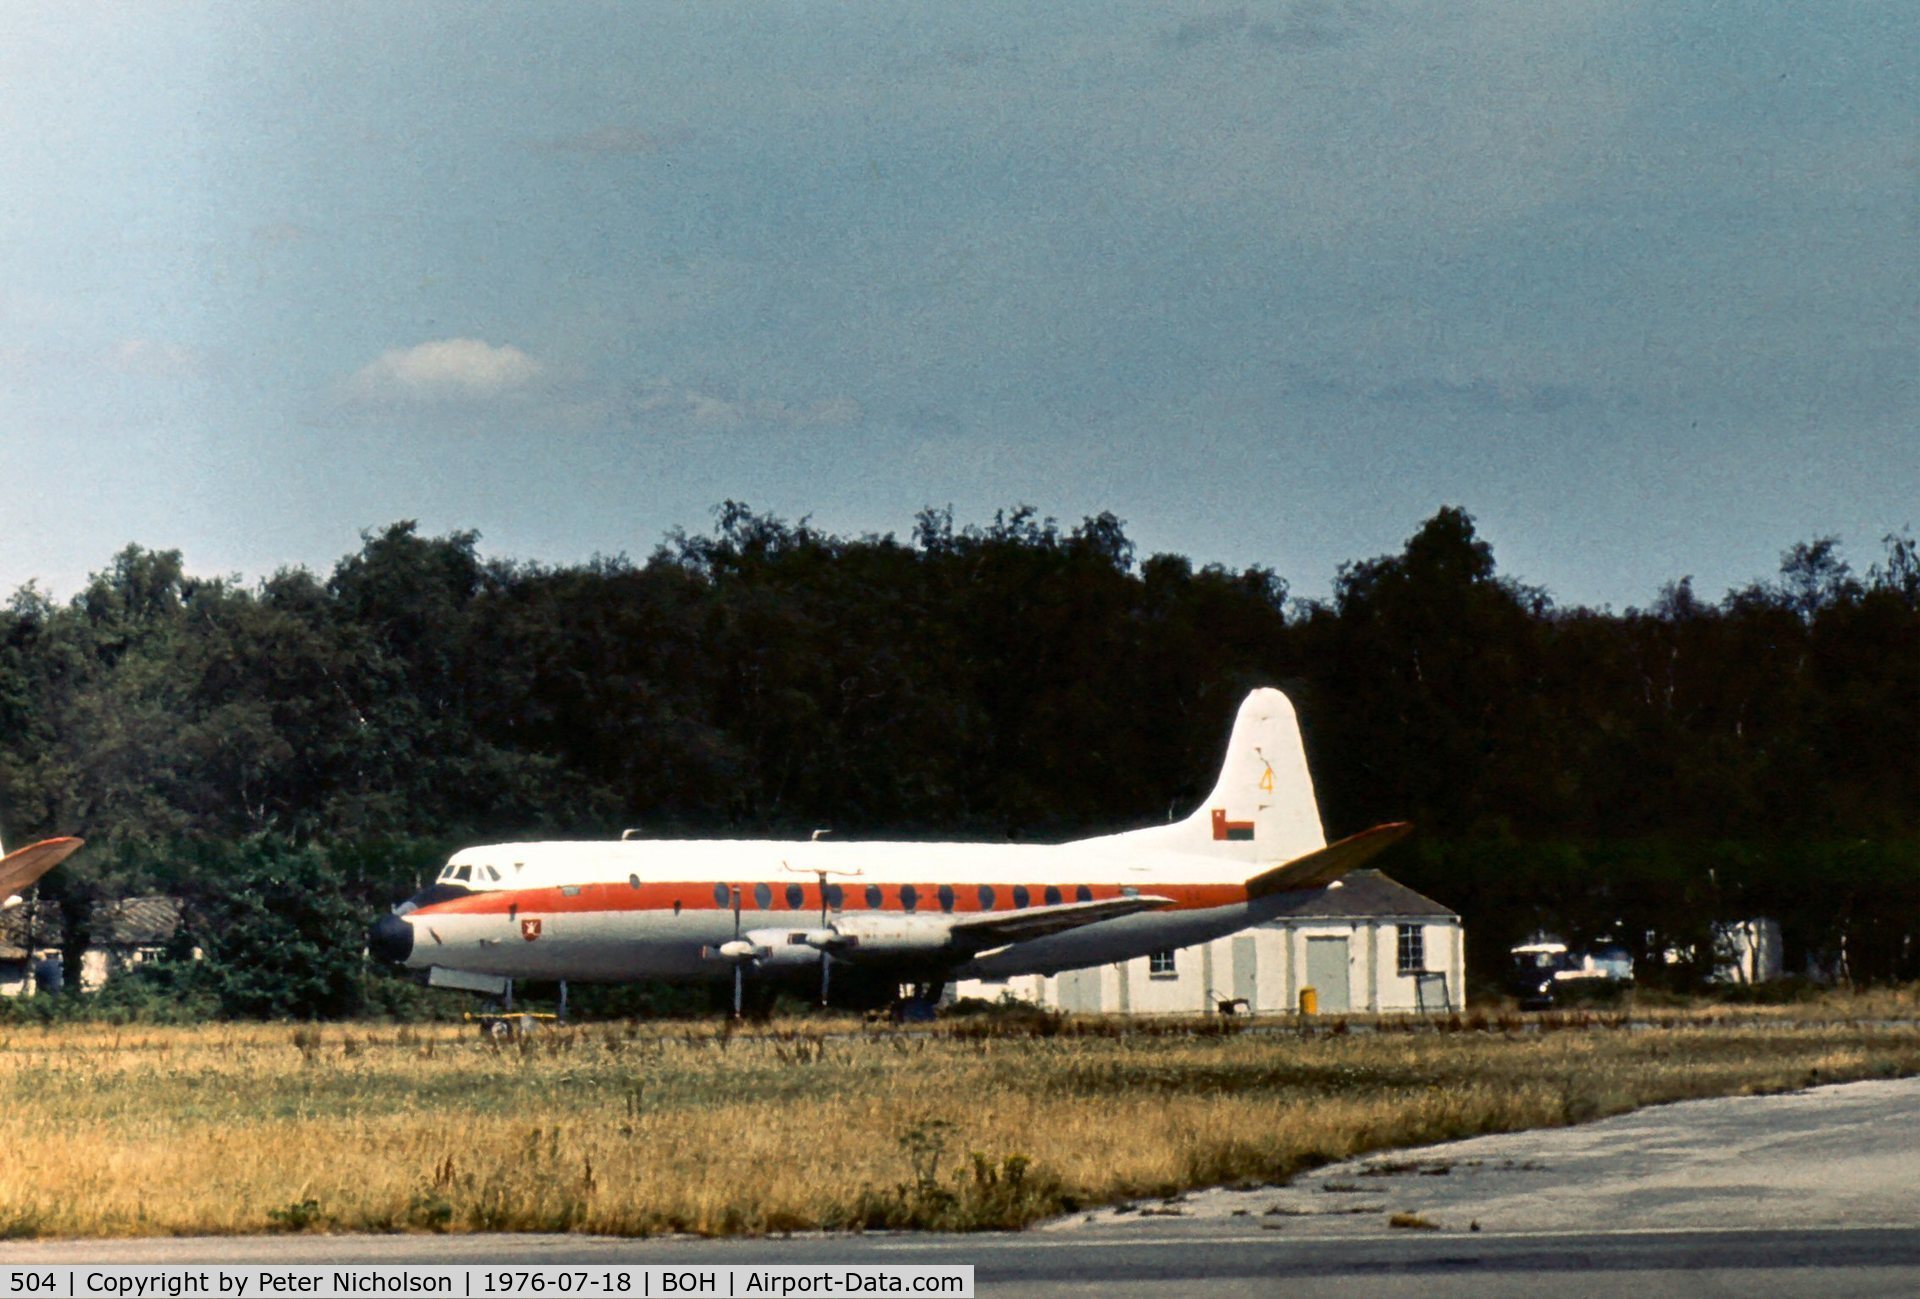 504, 1958 Vickers Viscount 808 C/N 423, Viscount 808C of the Sultan of Oman's Air Force seen at Bournemouth Hurn in the Summer of 1976.